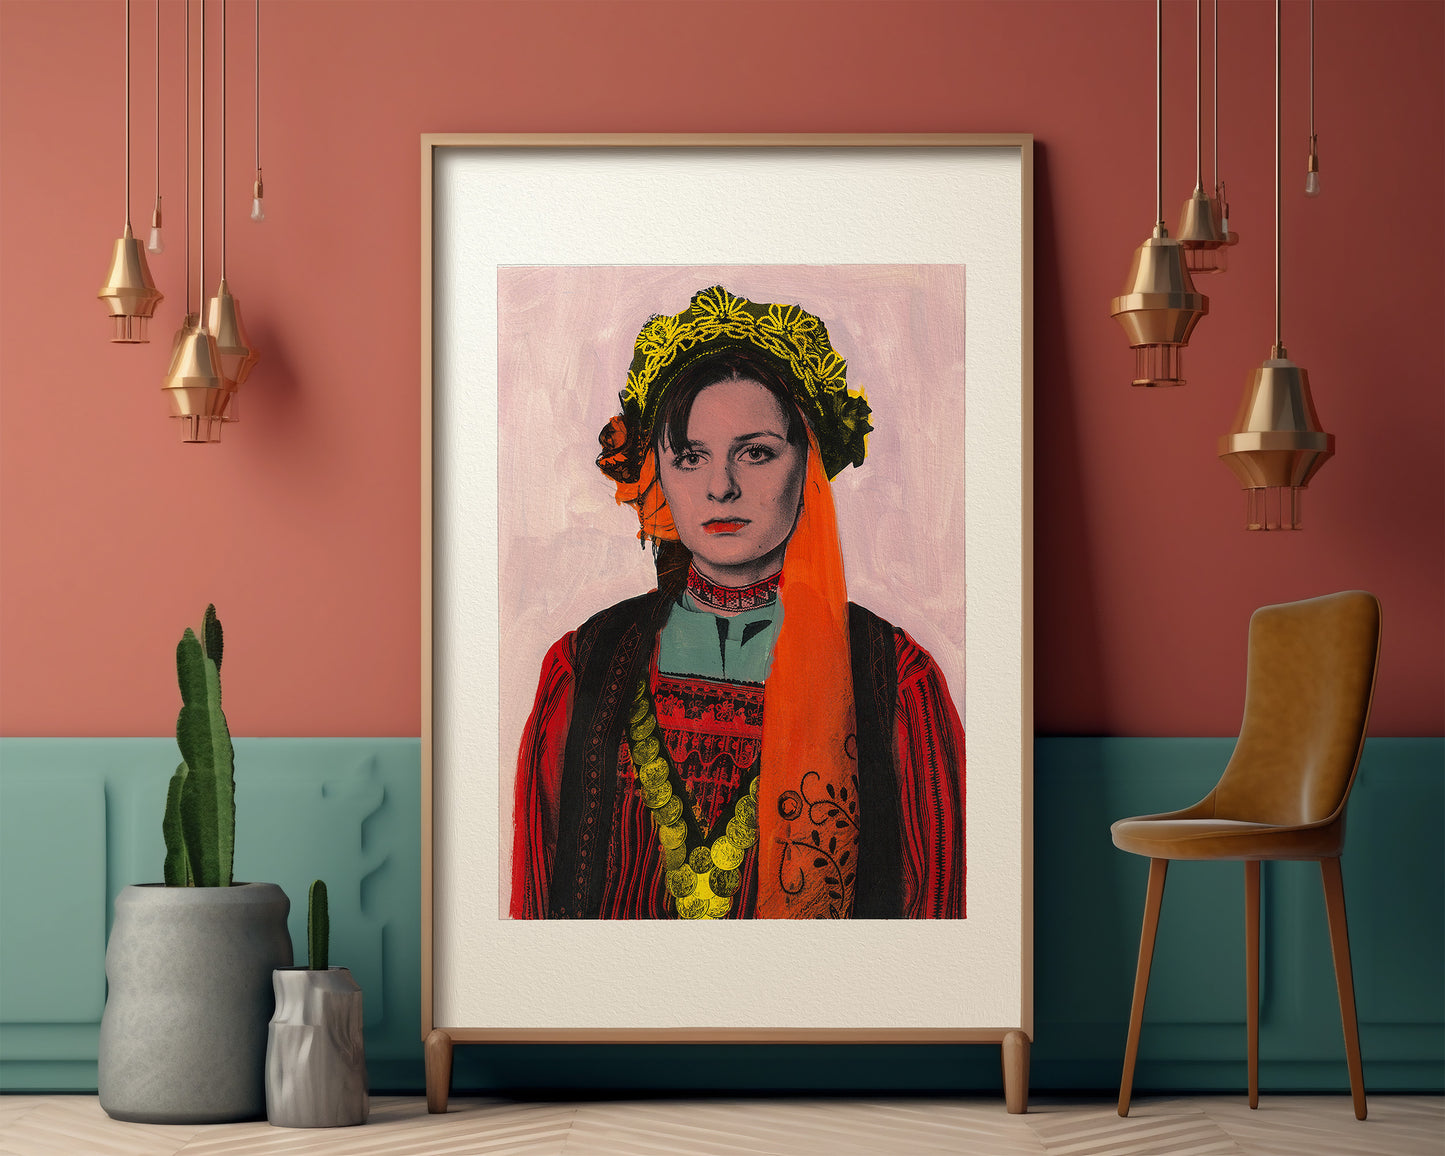 Painting Pop Art Wall Art from Greece | Orange Scarf Metaxades Costume from Evros, Thrace, by George Tatakis - inside an eclectic room